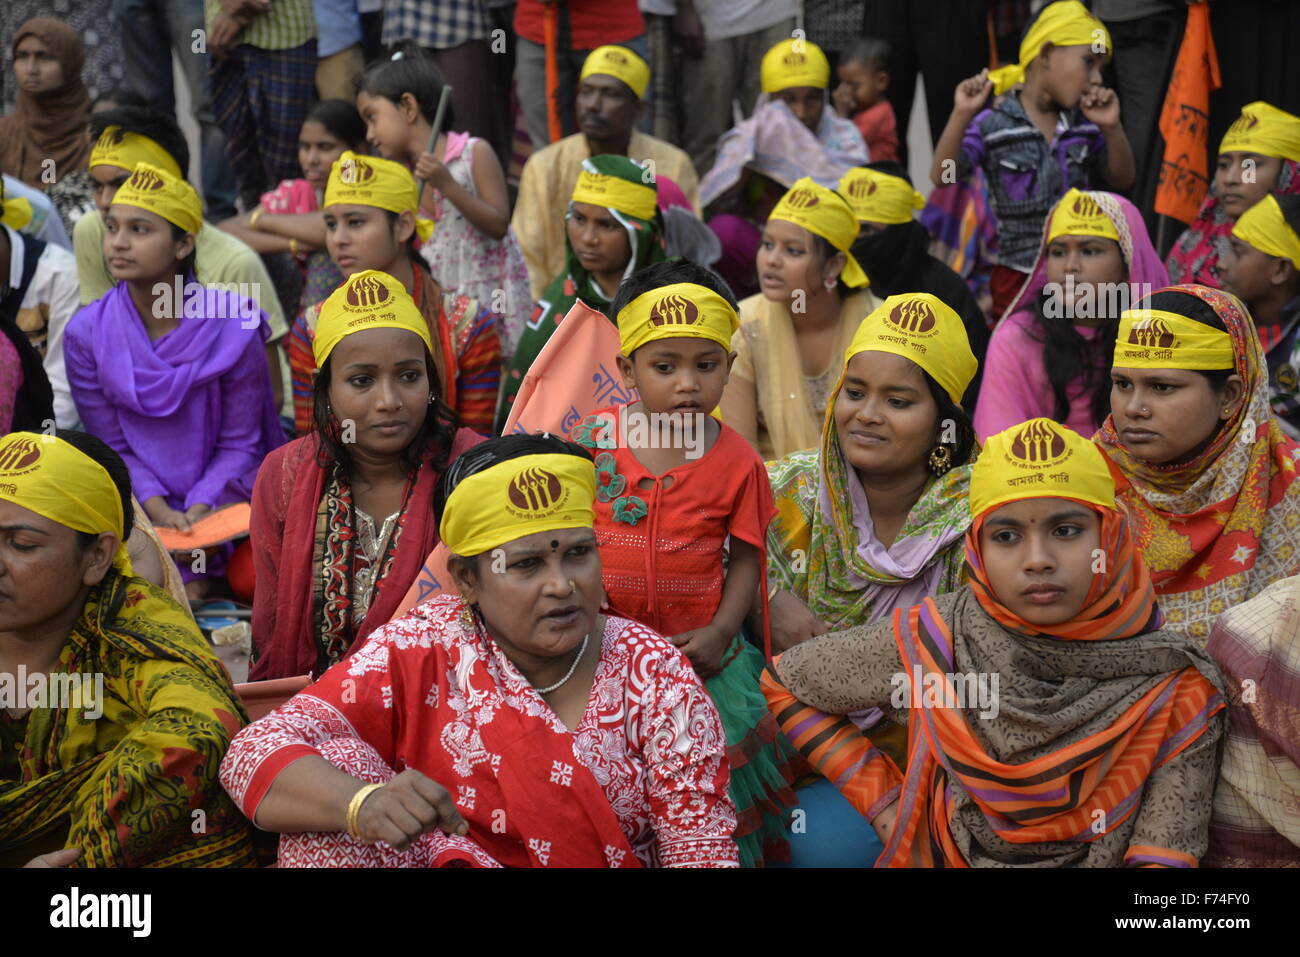 Dhaka, Bangladesh. 25th Nov, 2015. Bangladeshi Women participates Rights activists made protest in front of Central Shohid Minar Dhaka demanding elimination of violence against women on the occasion of the International Day for the Elimination of Violence against Women in Dhaka, Bangladesh. On November 25, 2015 Rights activists made protest in front of Central Shohid Minar Dhaka demanding elimination of violence against women on the occasion of the International Day for the Elimination of Violence against Women in Dhaka, Bangladesh. Credit:  Mamunur Rashid/Alamy Live News Stock Photo